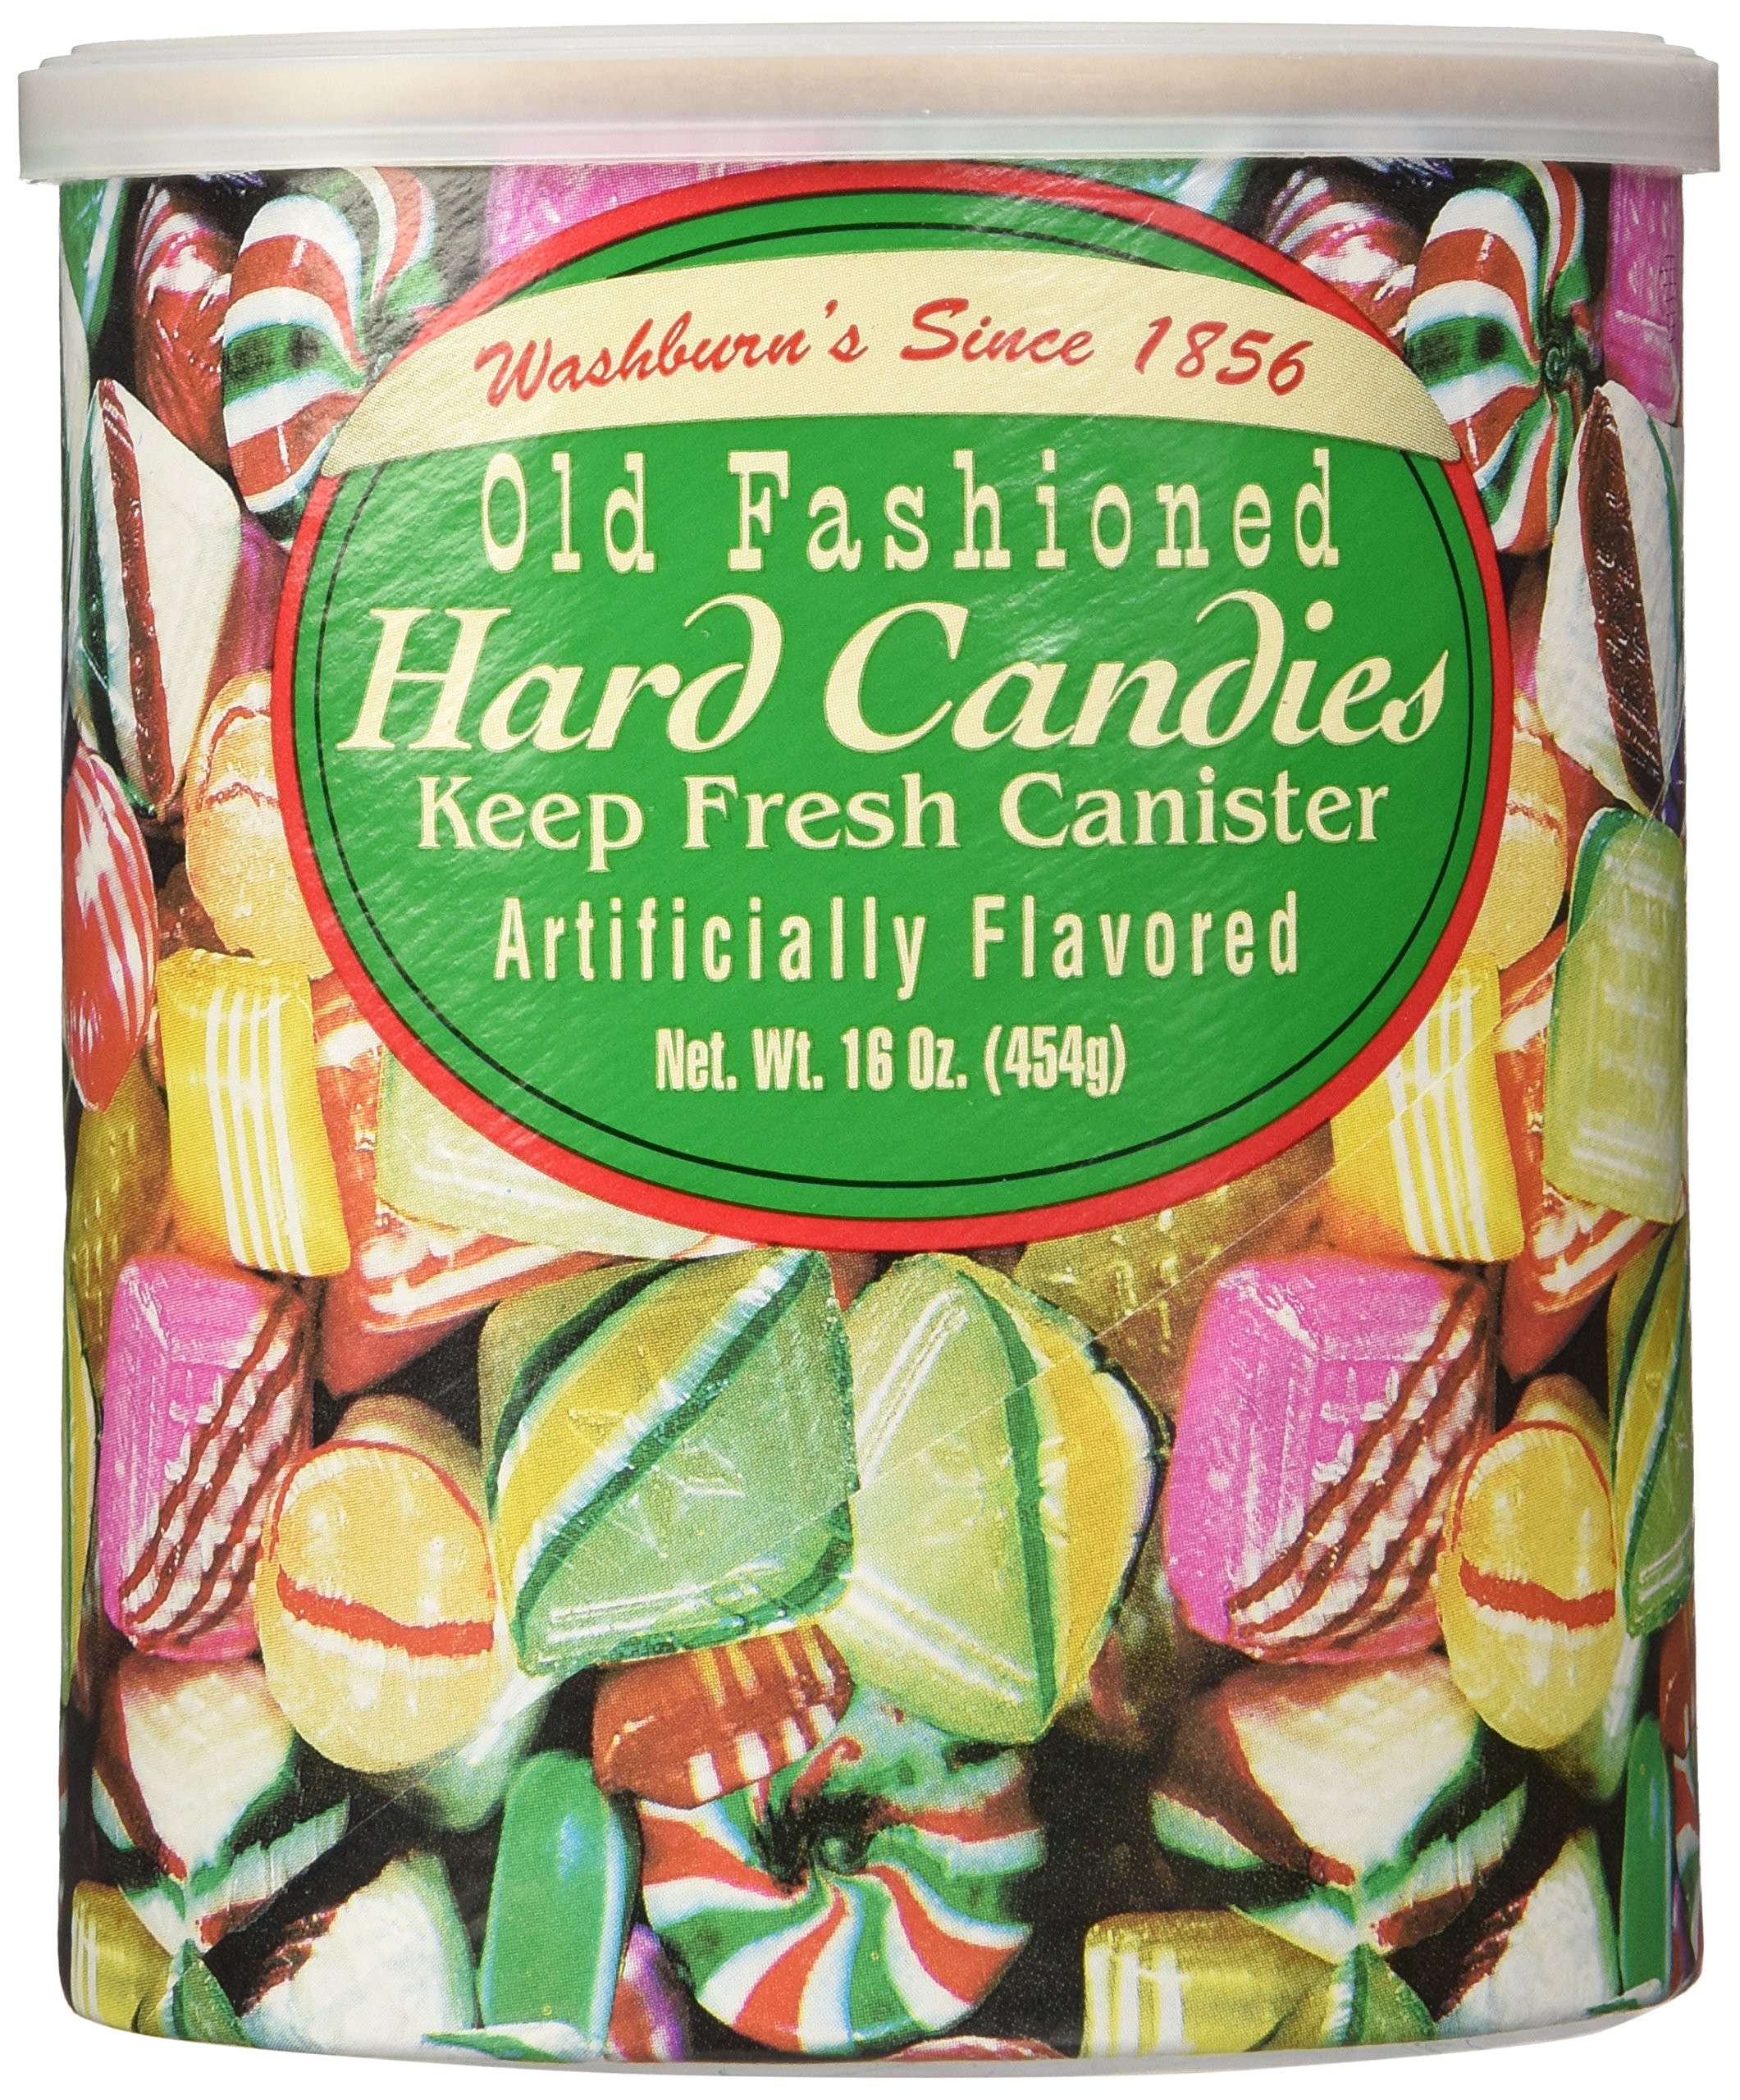 Hard Christmas Candy
 Washburns Old Fashioned Hard Can s 16 oz Canisters 2